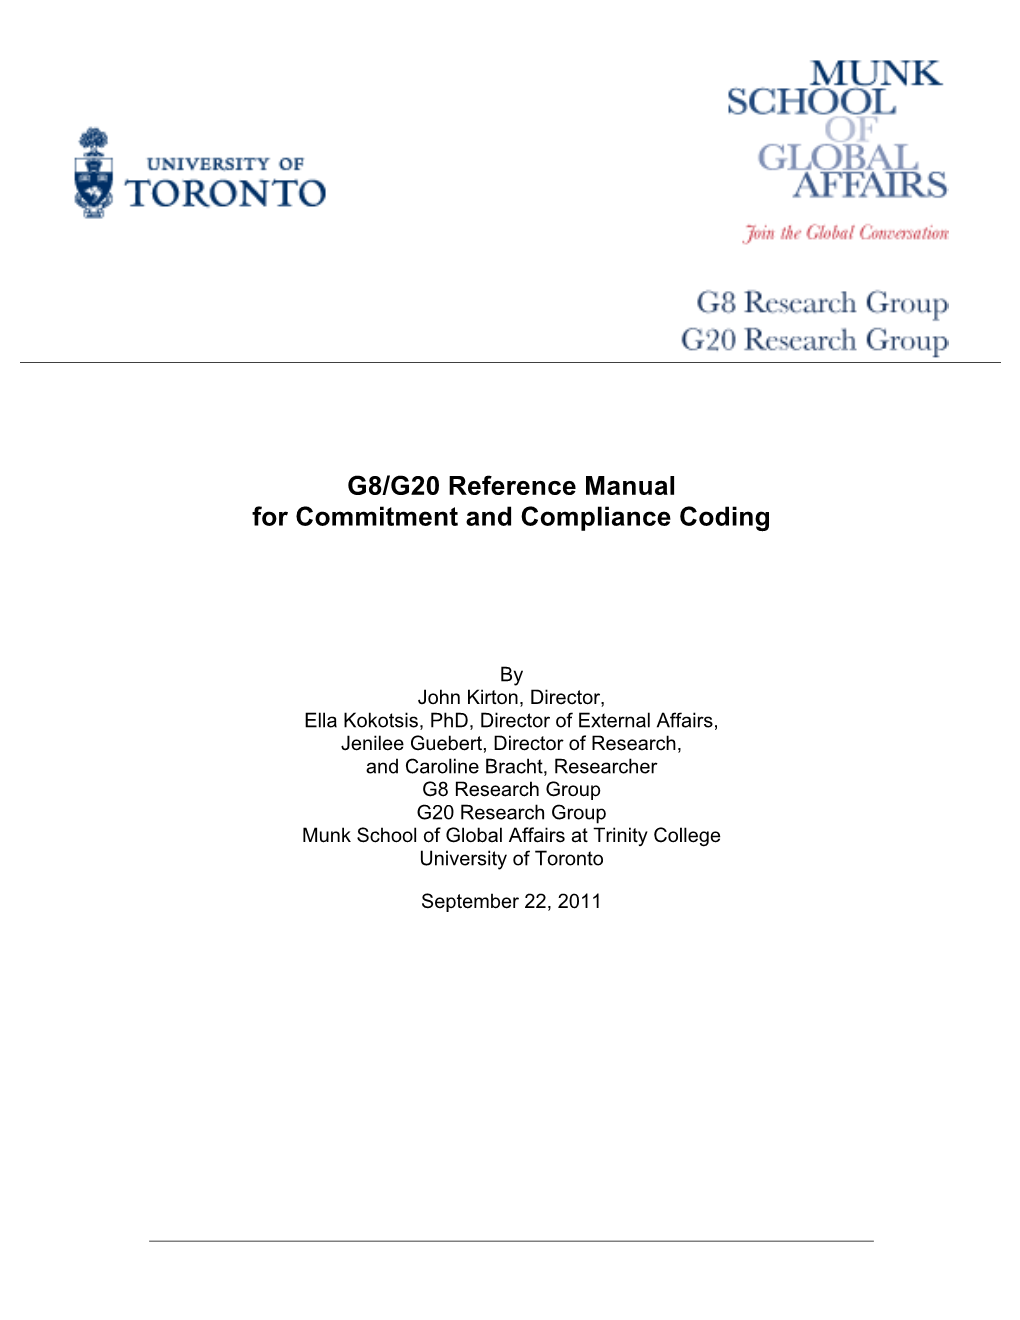 G8/G20 Reference Manual for Commitment and Compliance Coding